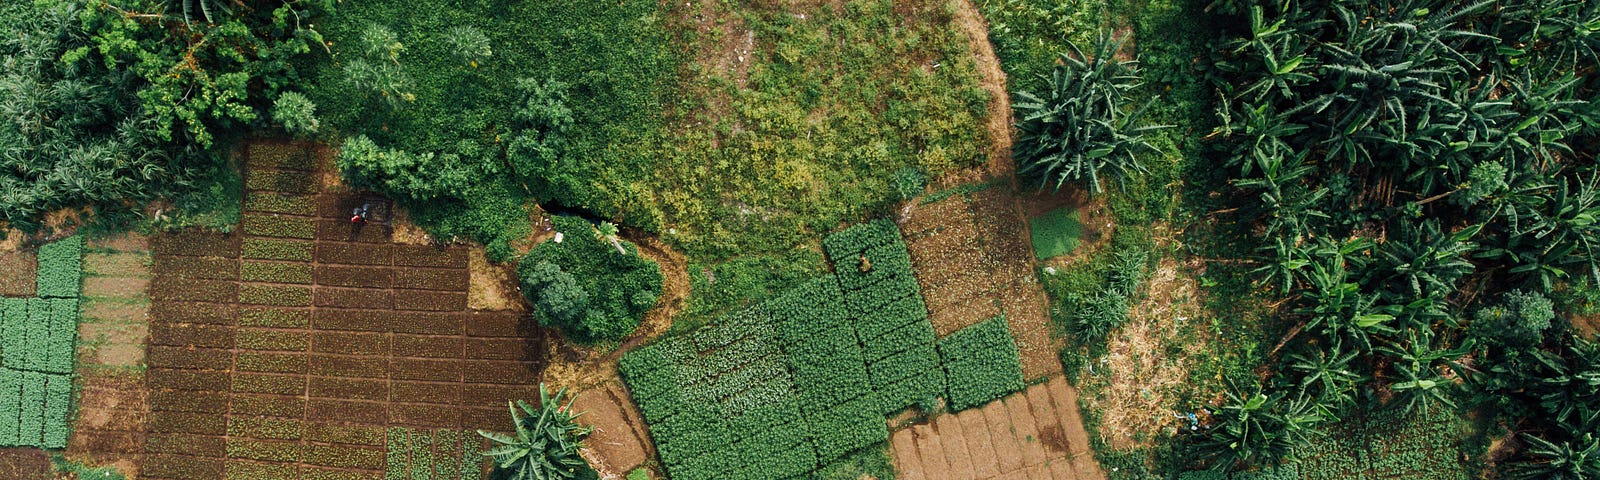 An aerial view of agricultural and cultivated land in Nigeria, featuring some uncultivated forest areas, and flat land split into rectangular sections